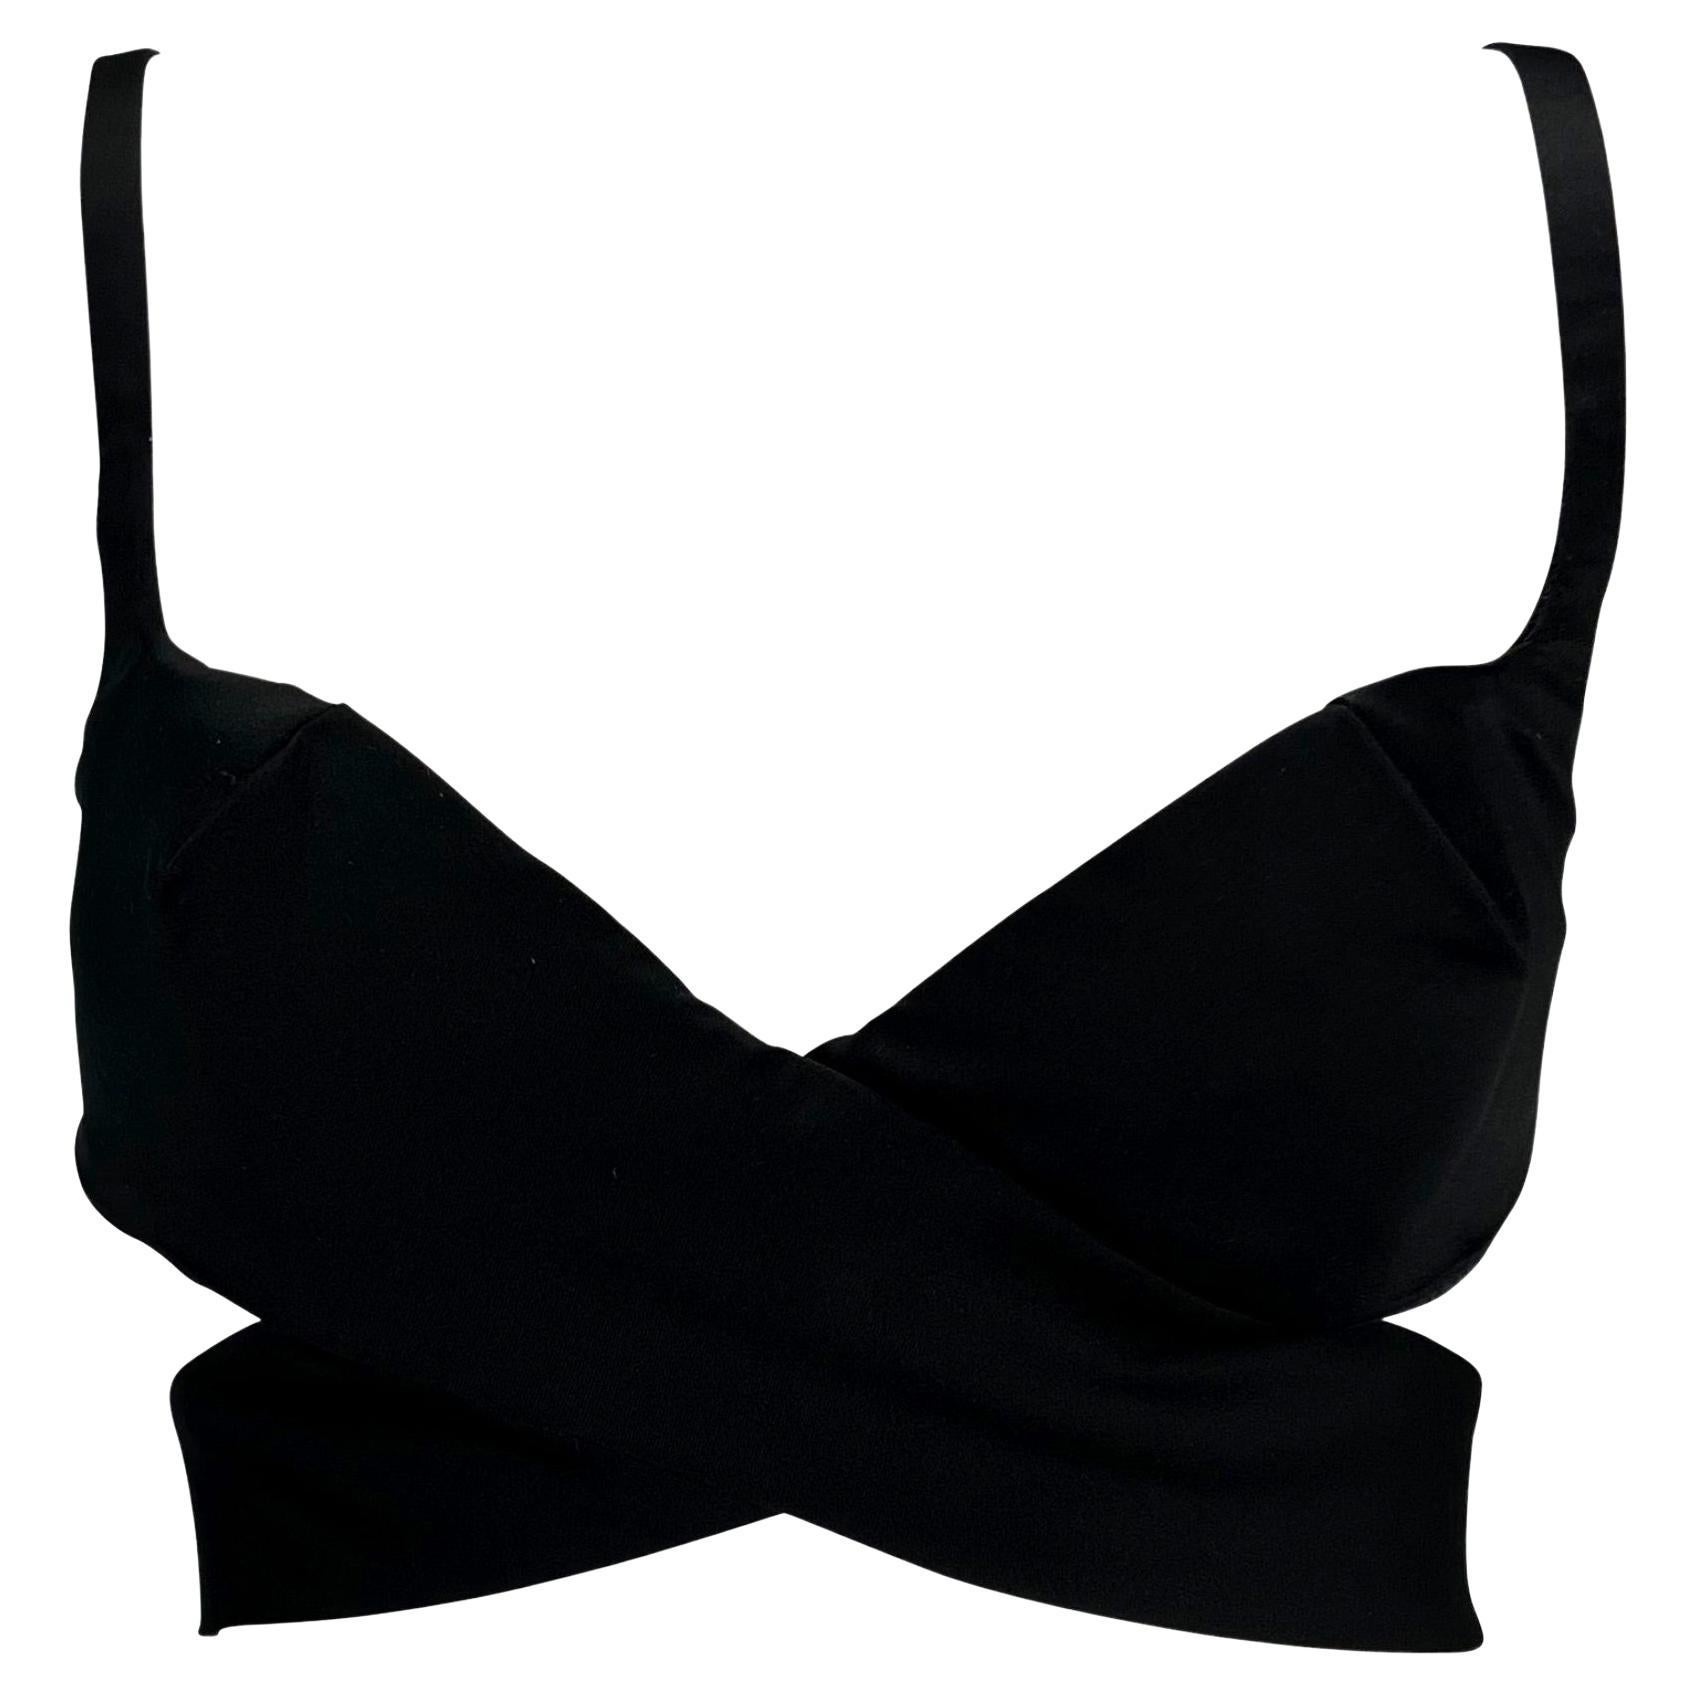 S/S 2001 Gucci by Tom Ford Runway Black Satin Crossover Bralette Top For Sale